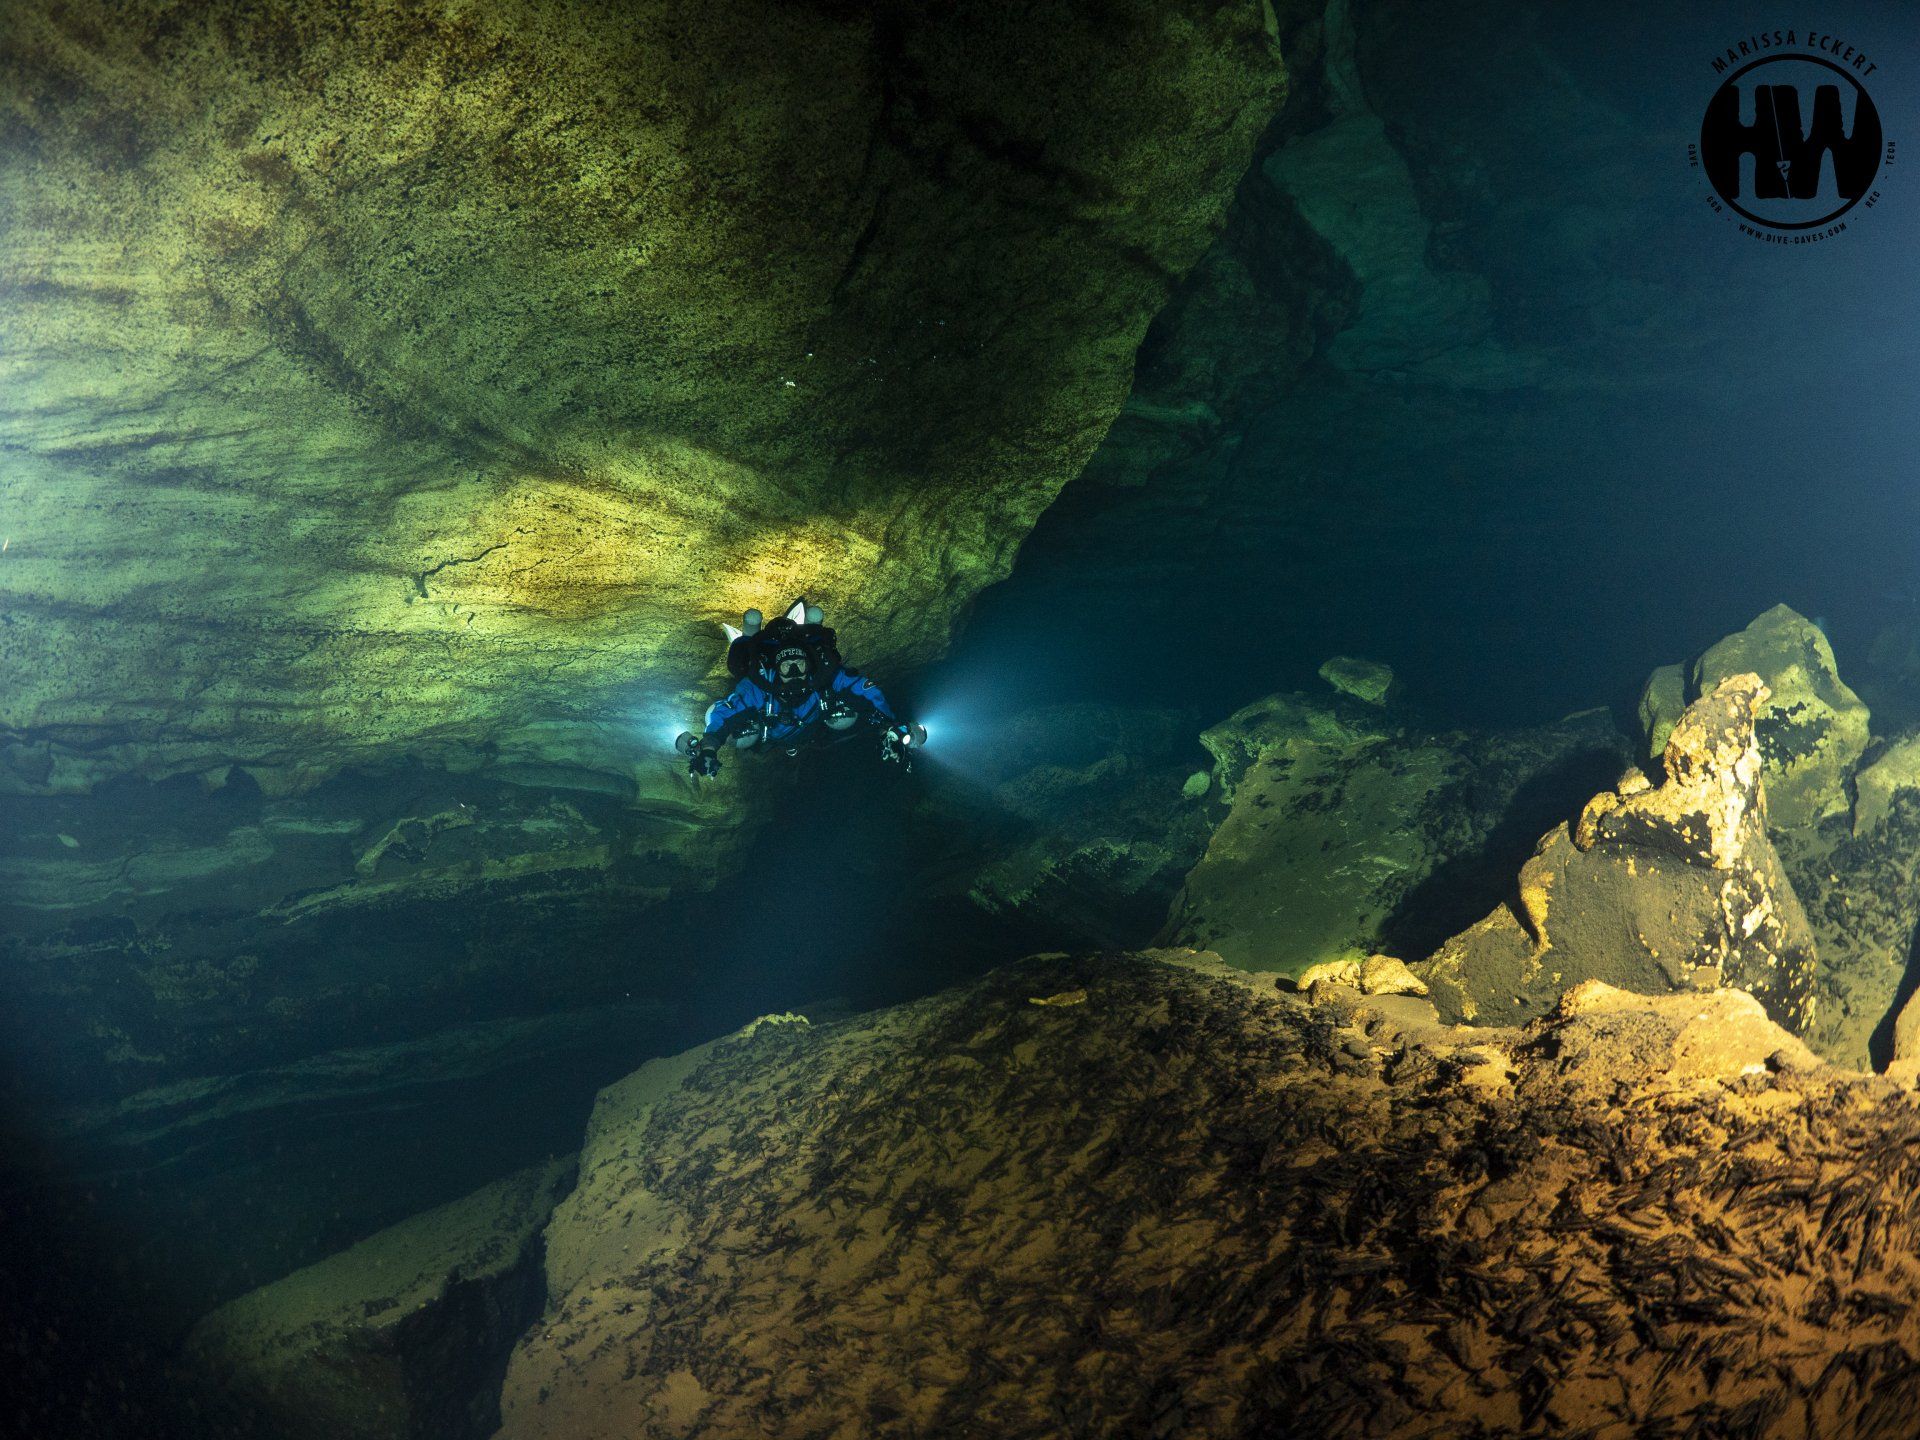 Rebreather diver with lights on the cave